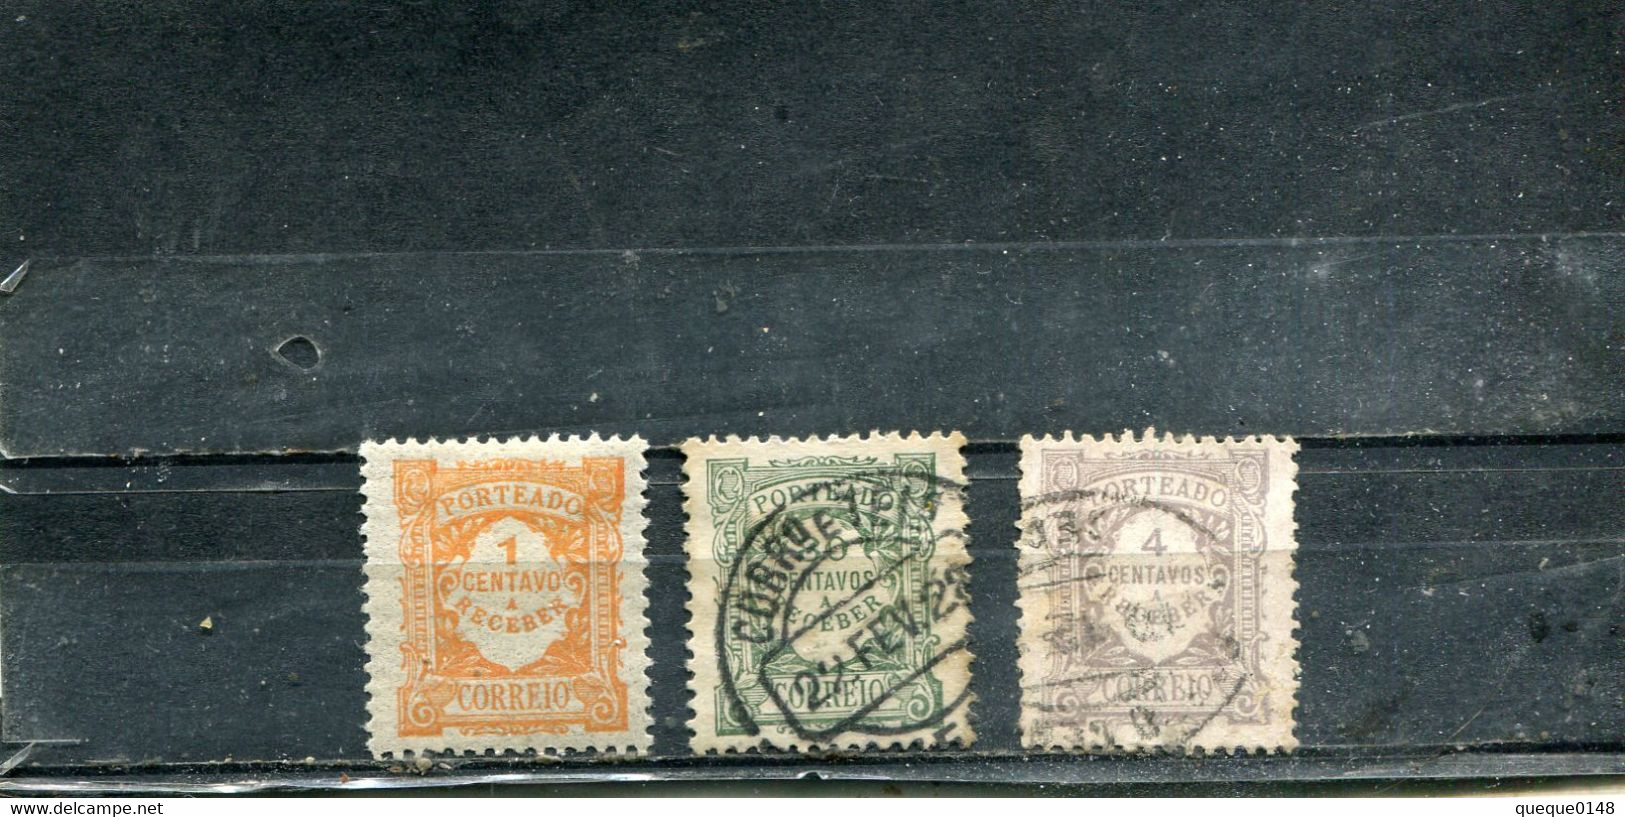 Portugal 1915 Yt 22 24-25 Type De 1904 - Used Stamps